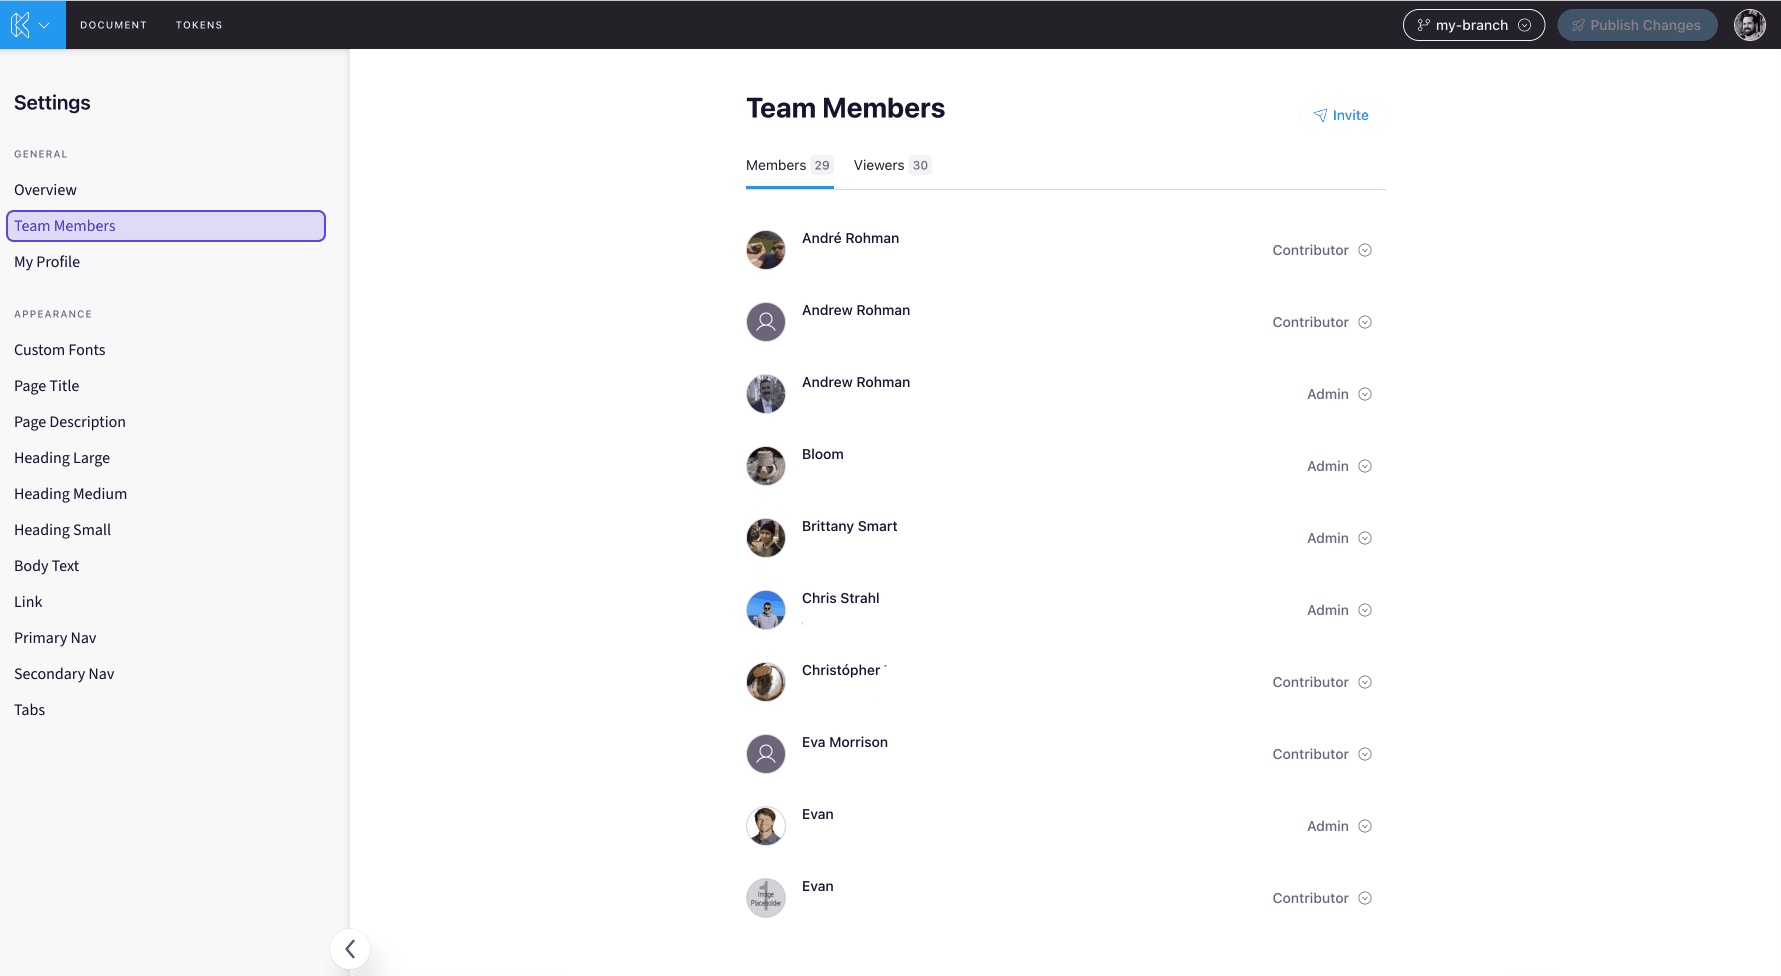 A dedicated and enhanced UI in one central spot allows for increased visibility into your design system team, making user management and role changes a snap!